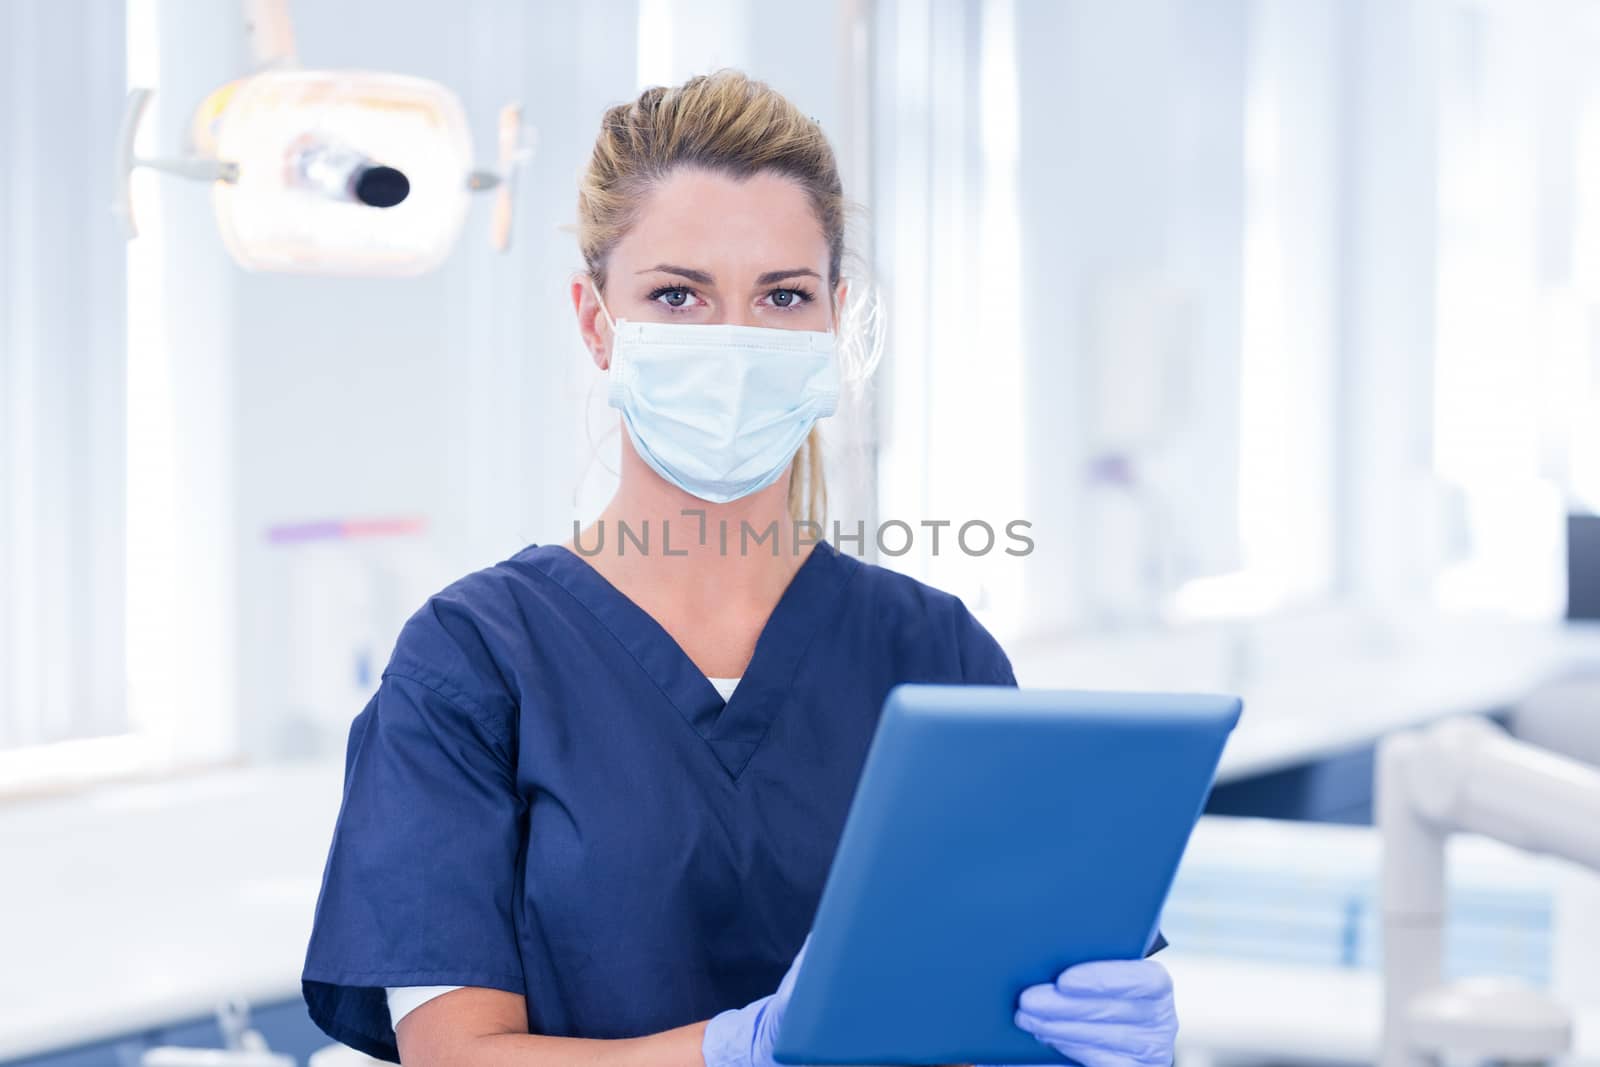 Dentist in mask using her tablet and looking at camera at the dental clinic